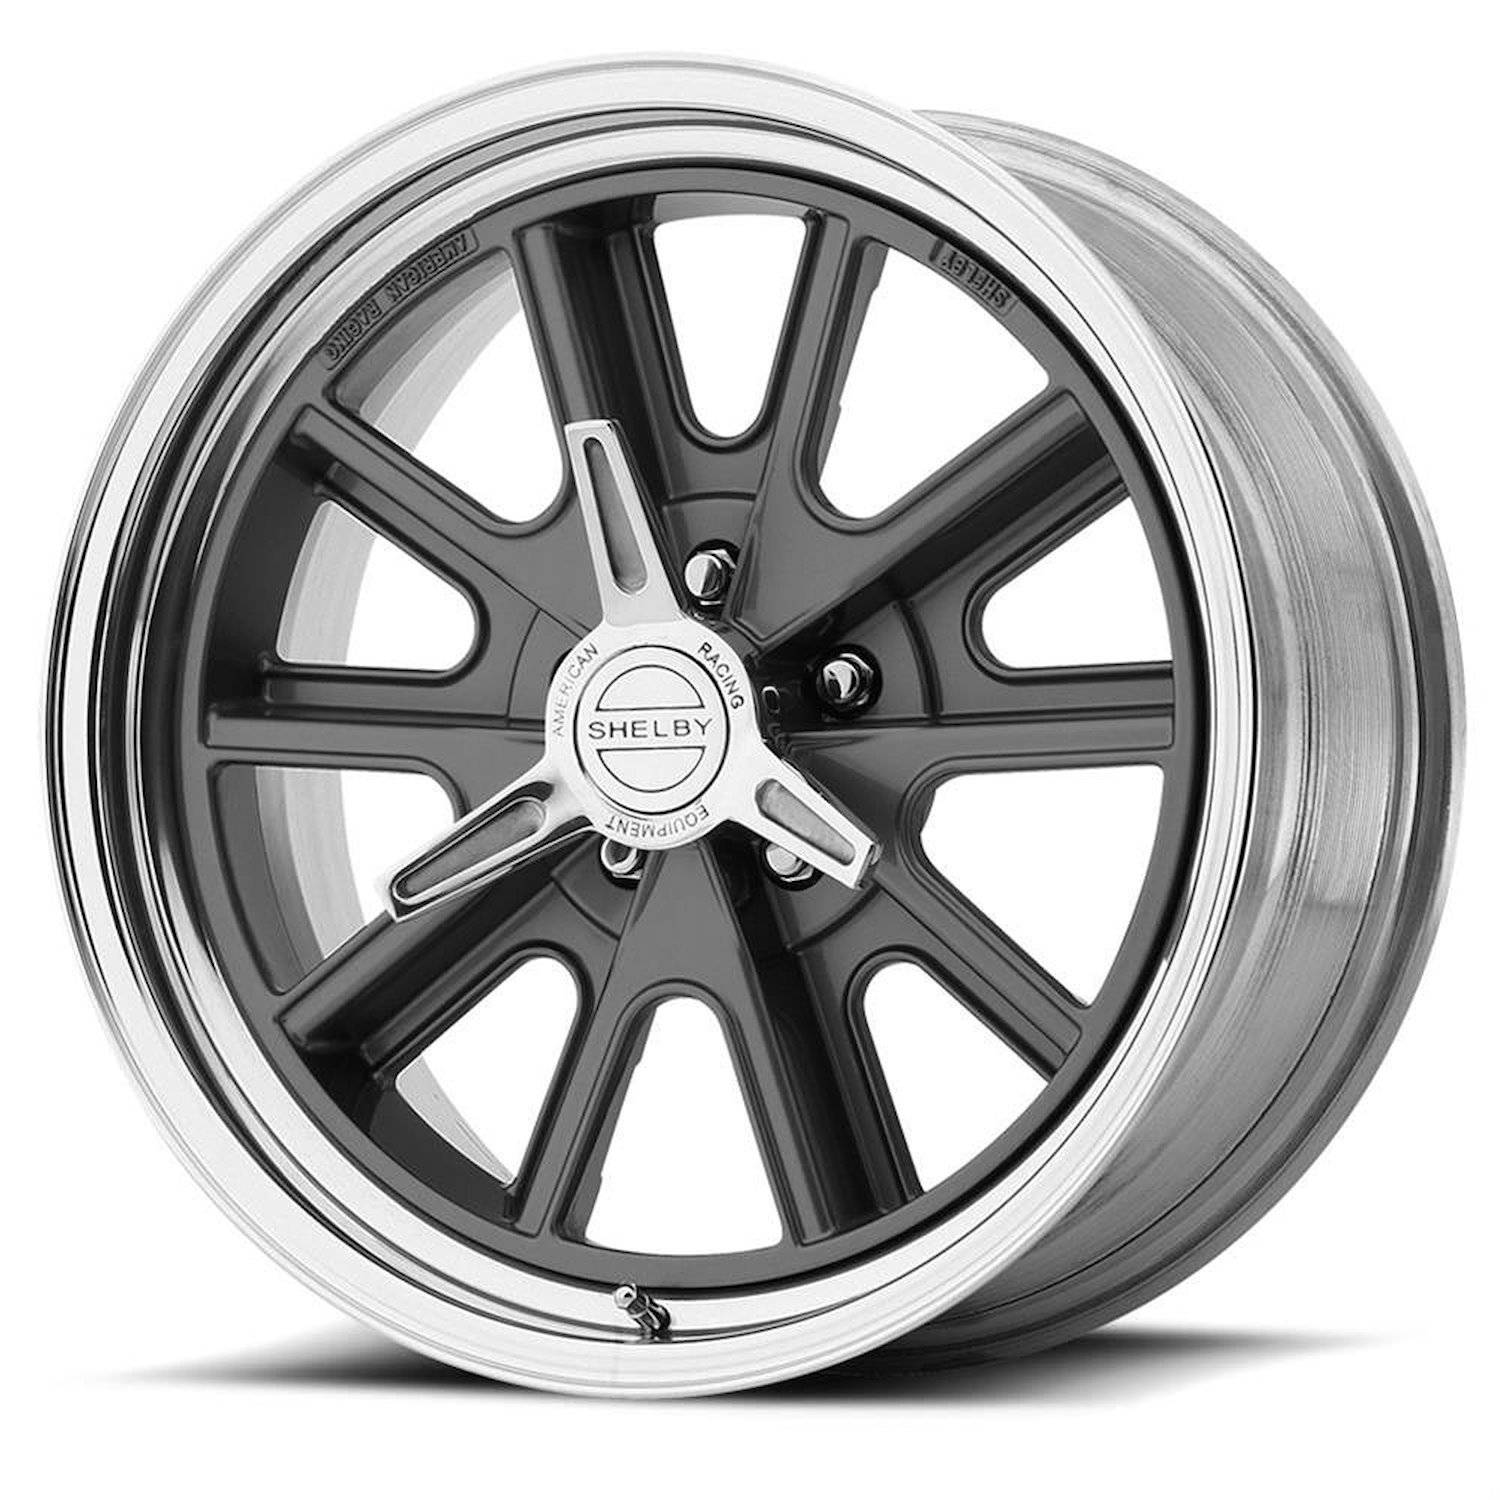 AMERICAN RACING 427 SHELBY COBRA TWO-PIECE MAG GRAY CENTER POLISHED BARREL 18 x 9.5 5x4.5 -25 4.27